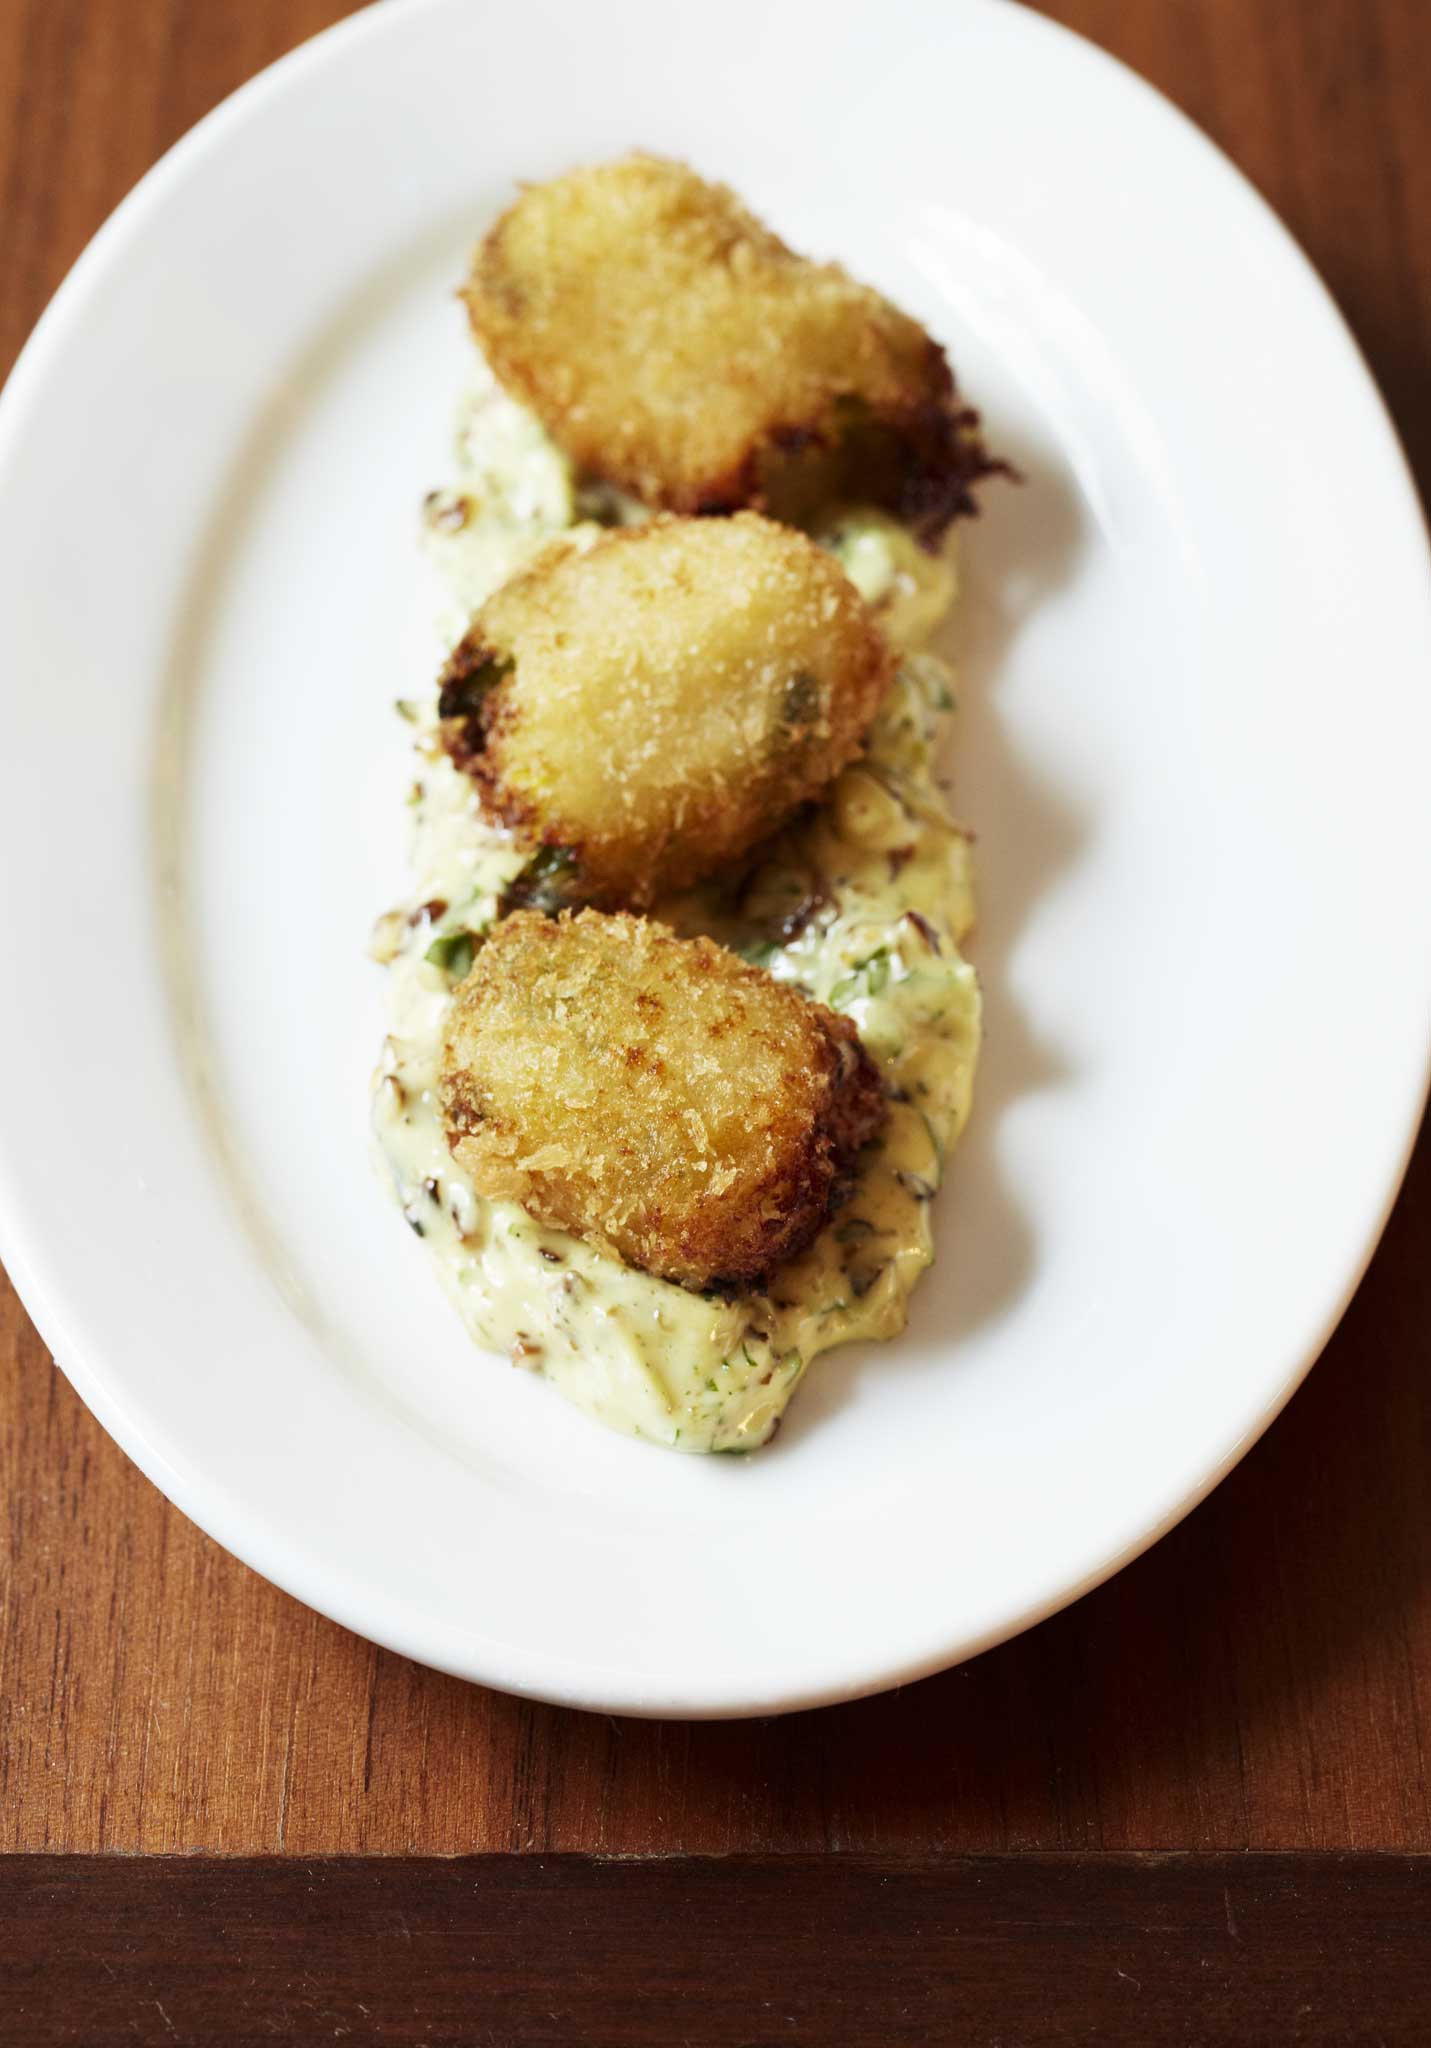 Stilton croquettes with walnut and celery mayonnaise